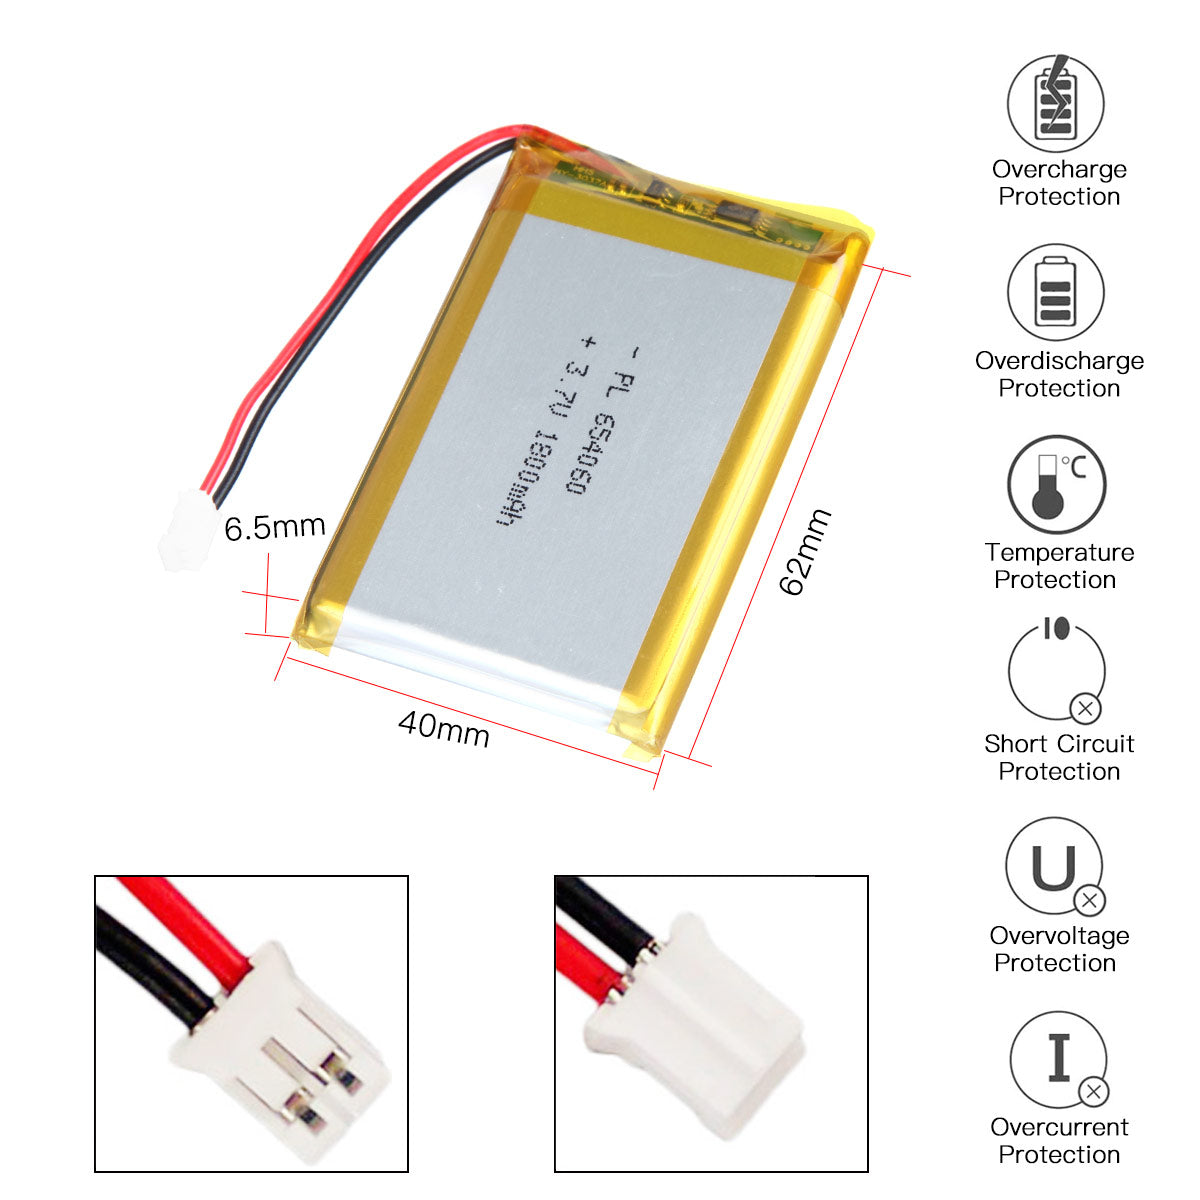 YDL 3.7V 1800mAh 654060 Rechargeable Lipo Battery with JST Connector - YDL Battery